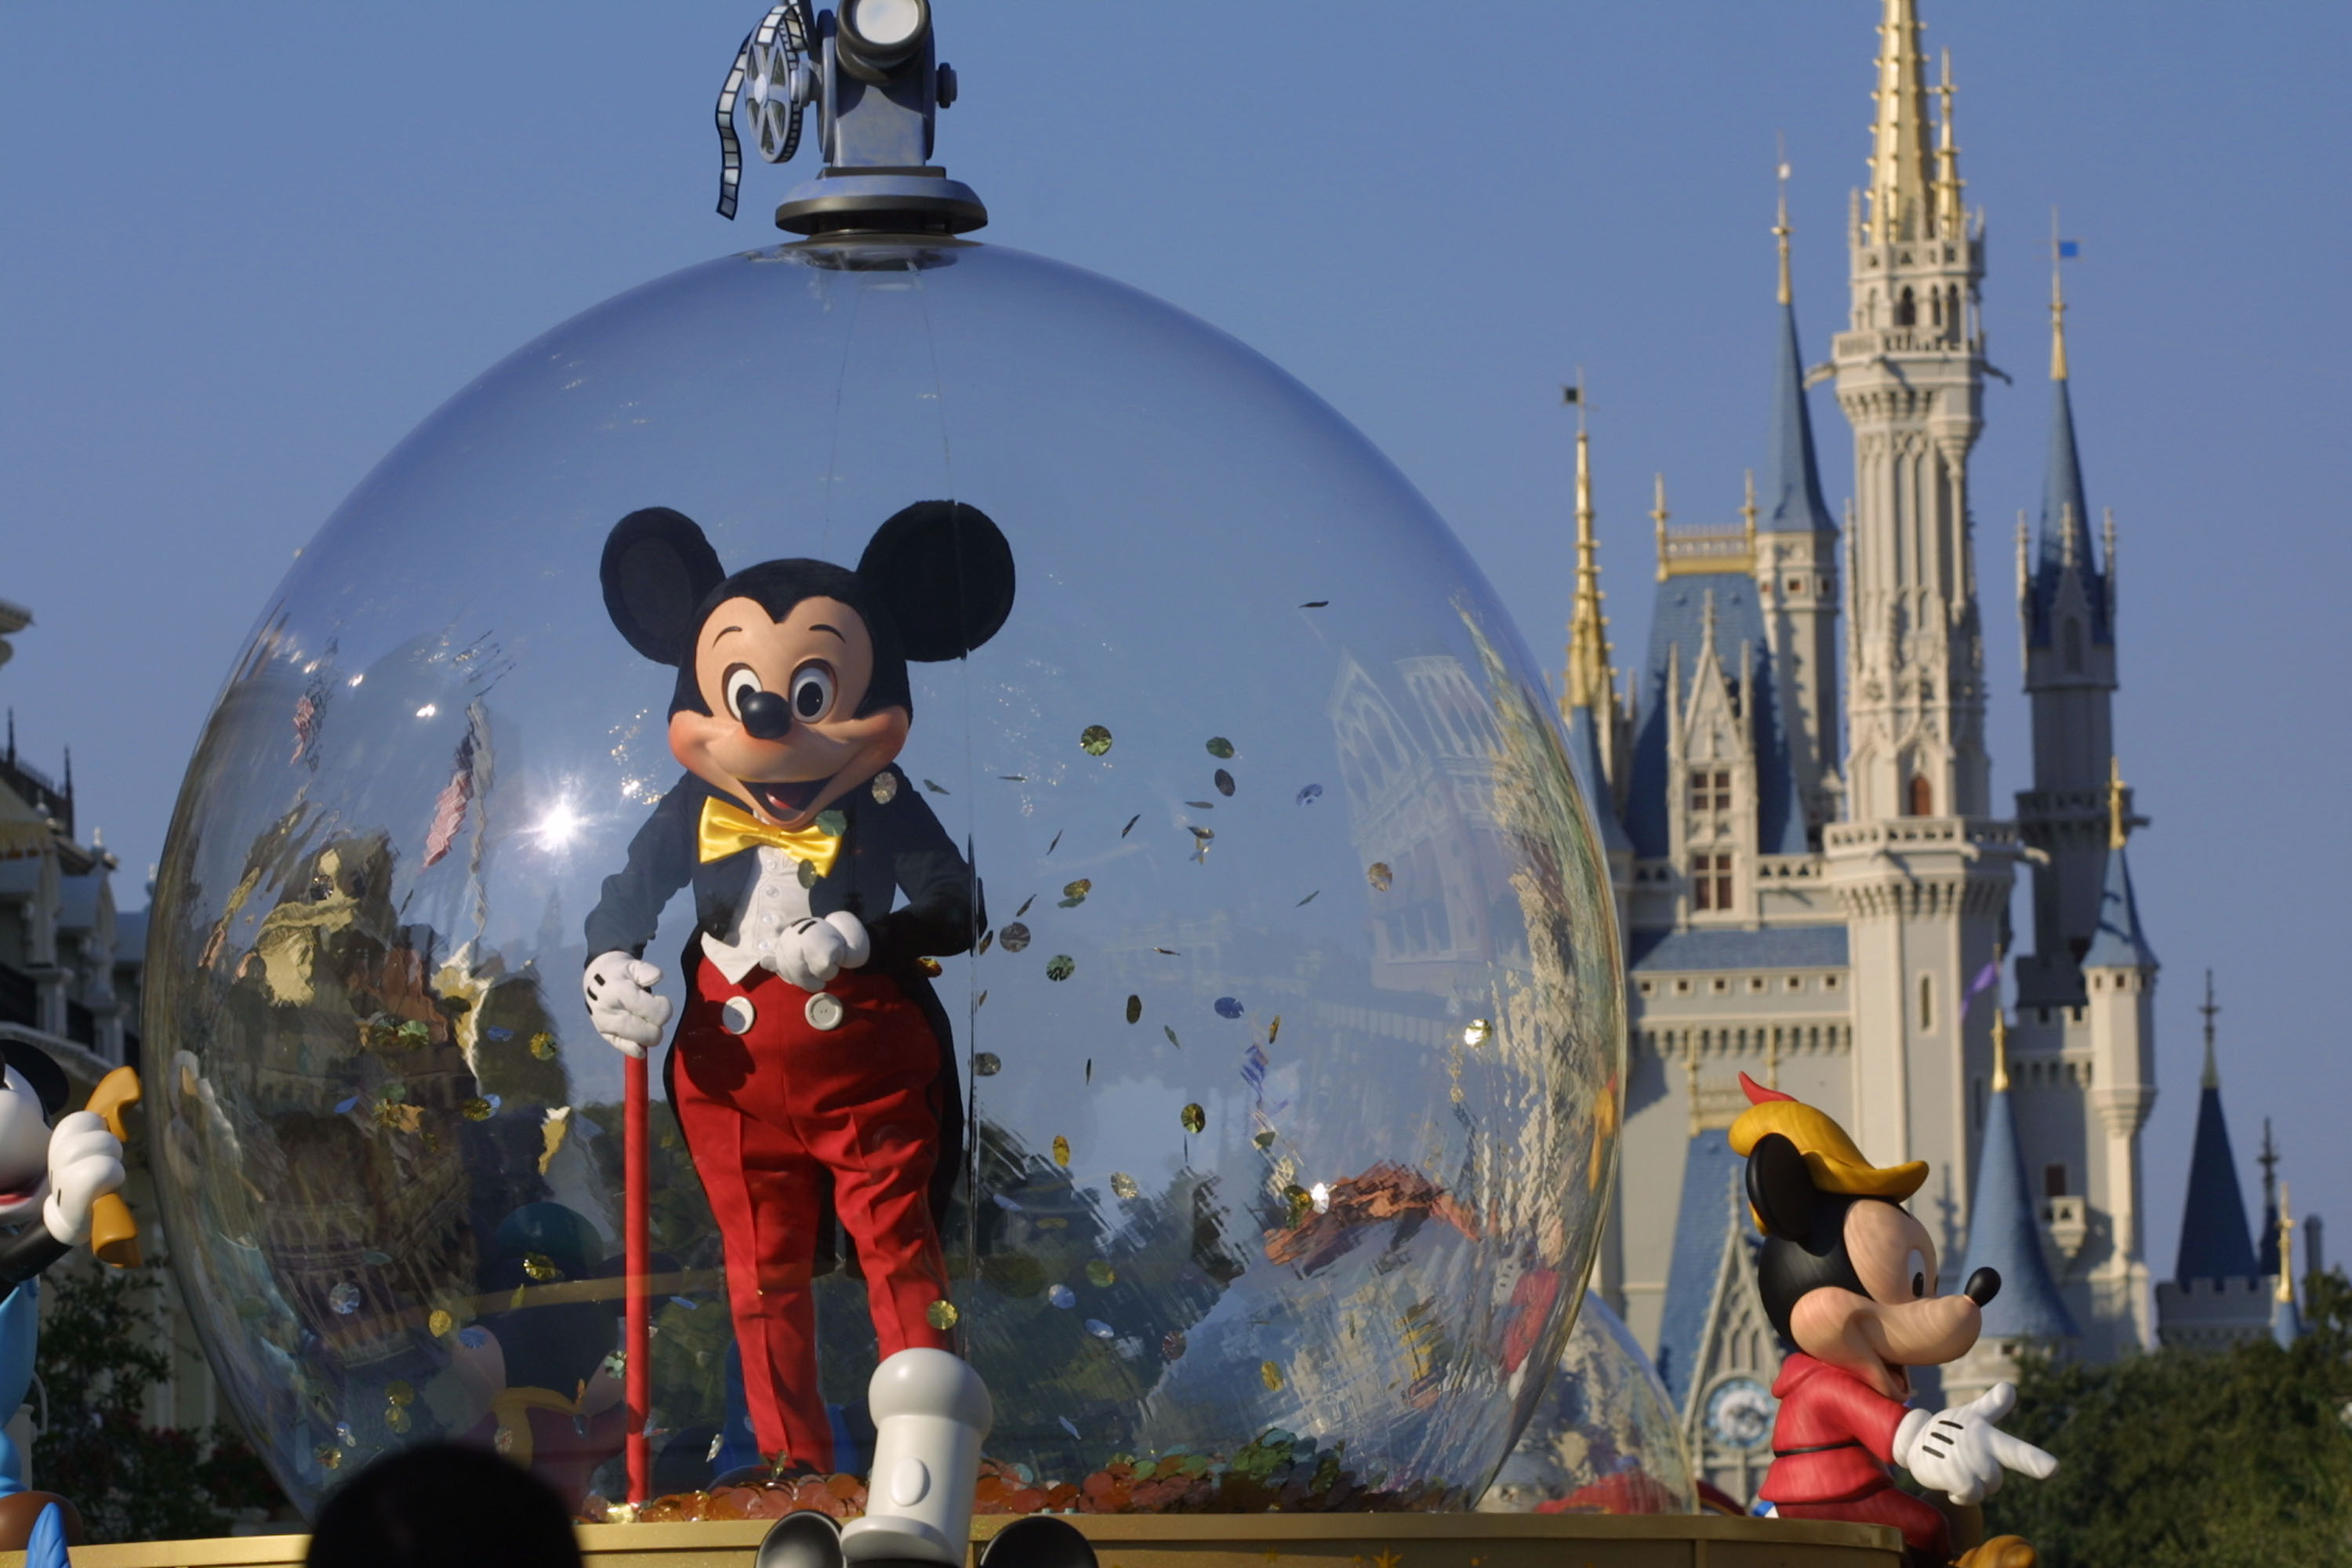 Disneyworld may be called the 'happiest place on earth' but it's increasingly one of the most...